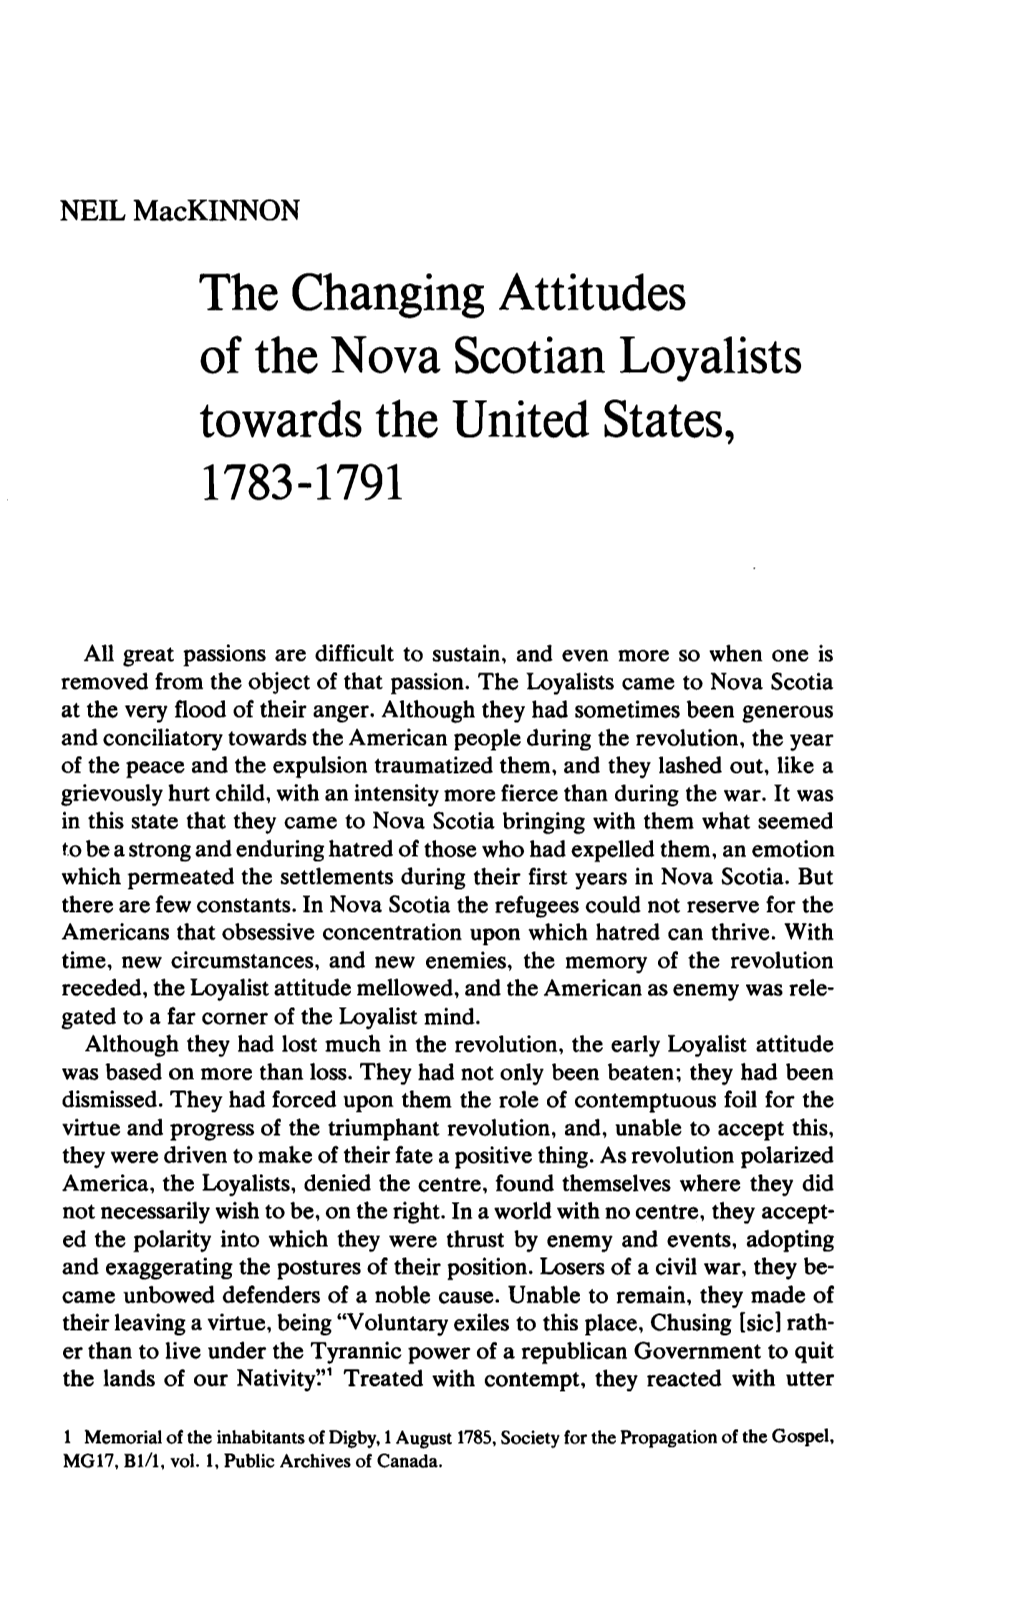 The Changing Attitudes of the Nova Scotian Loyalists Towards the United States, 1783-1791